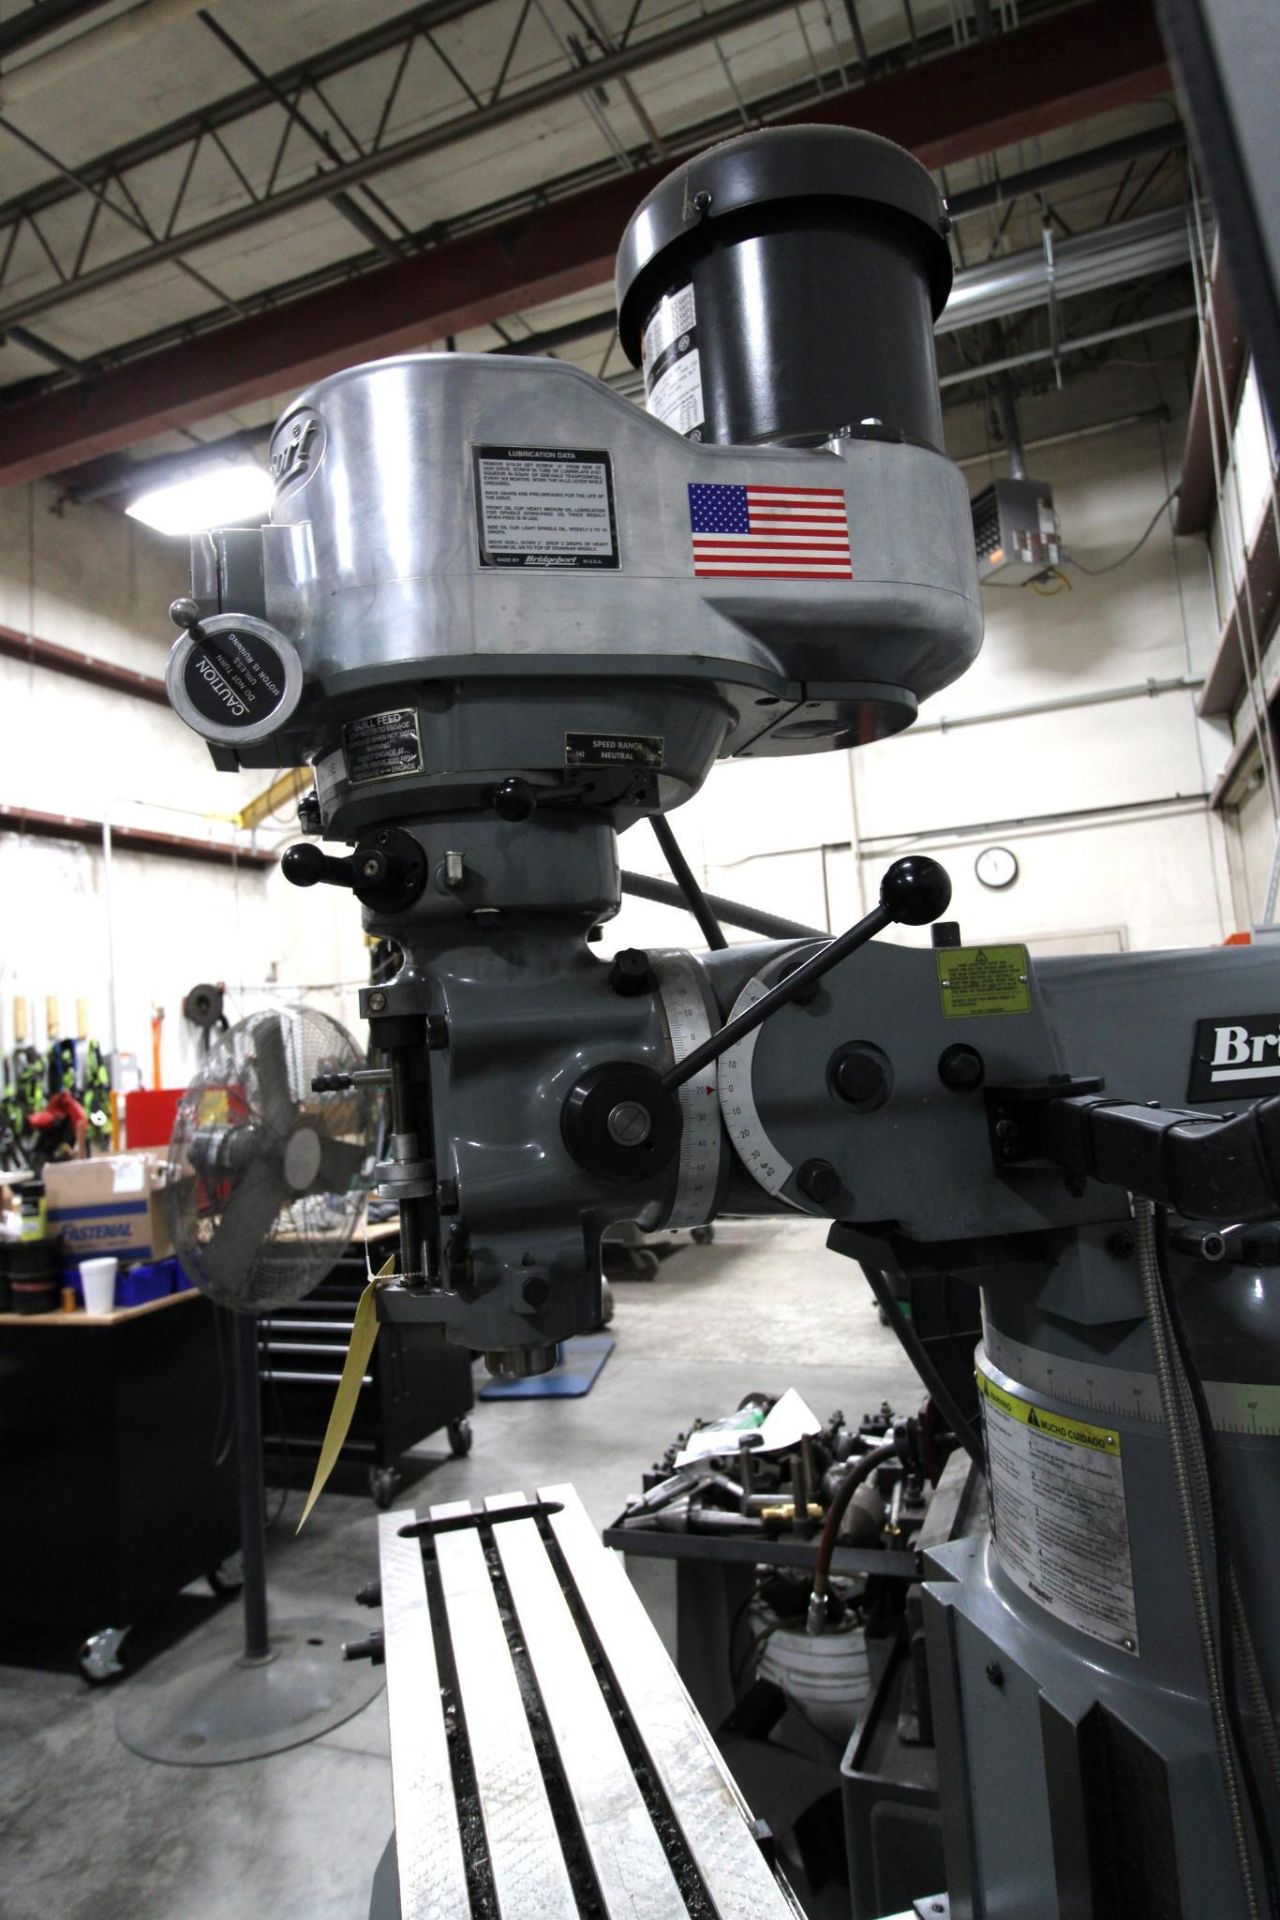 VERTICAL TURRET MILL, BRIDGEPORT SERIES 1, 9” x 48” tbl., 3-way pwr. feed, Acurite 2-axis D.R.O, 2- - Image 8 of 14